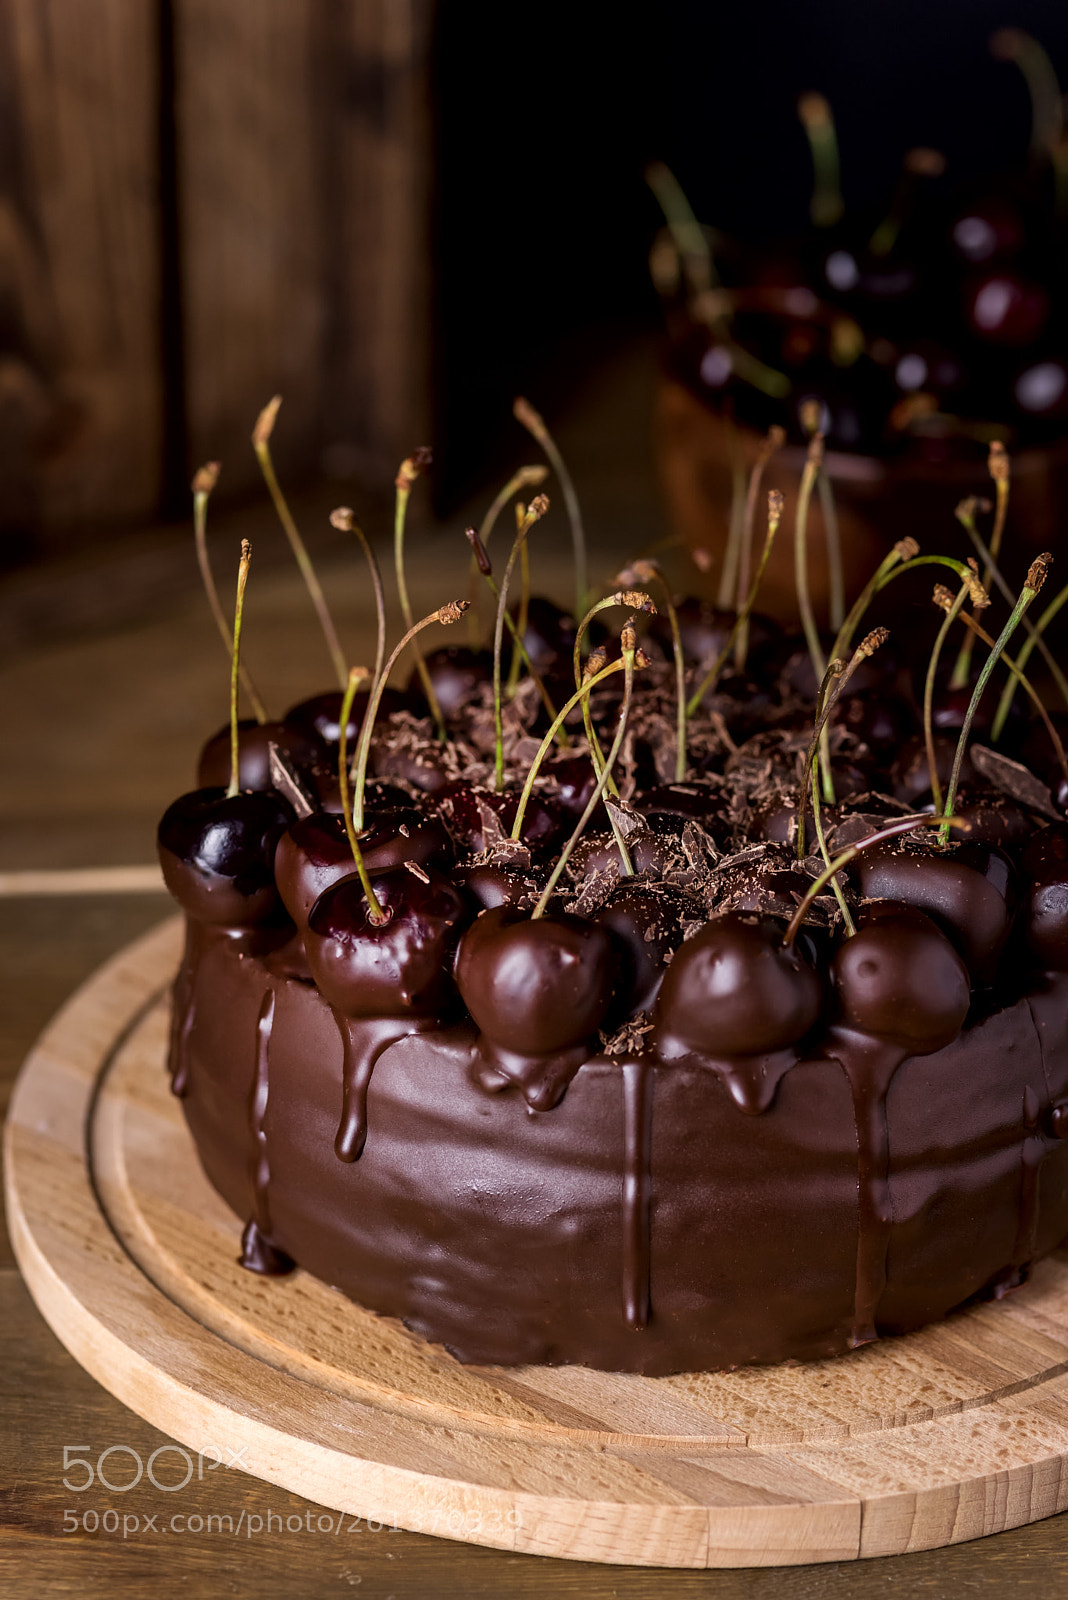 Nikon D750 sample photo. Chocolate cake decorated with photography